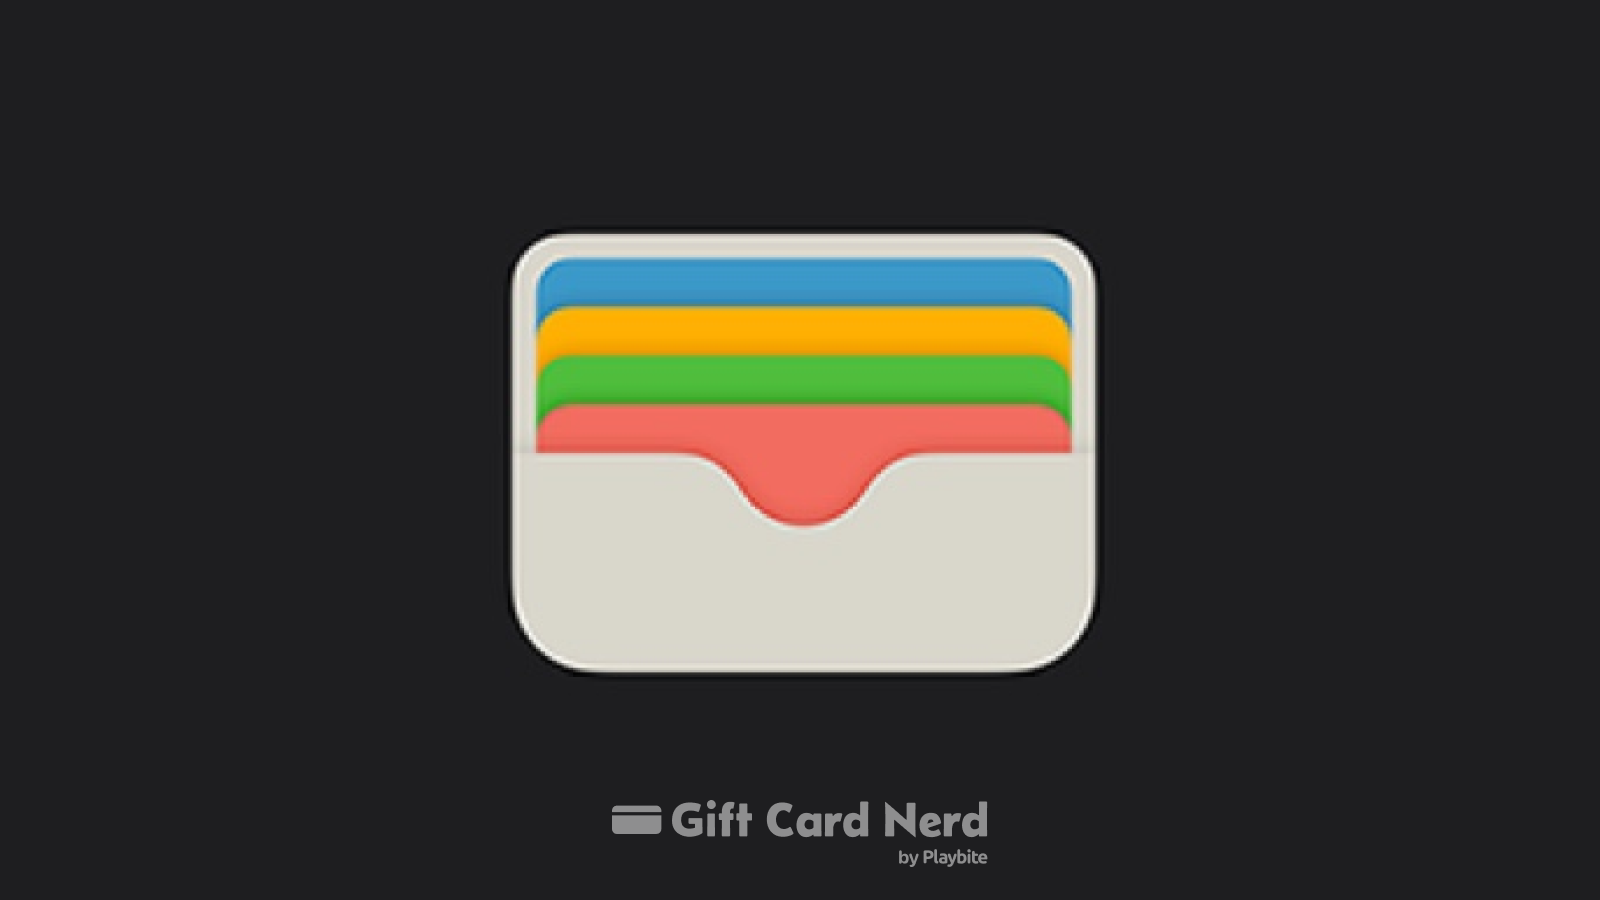 Can I use an Apple Gift Card on Amazon?